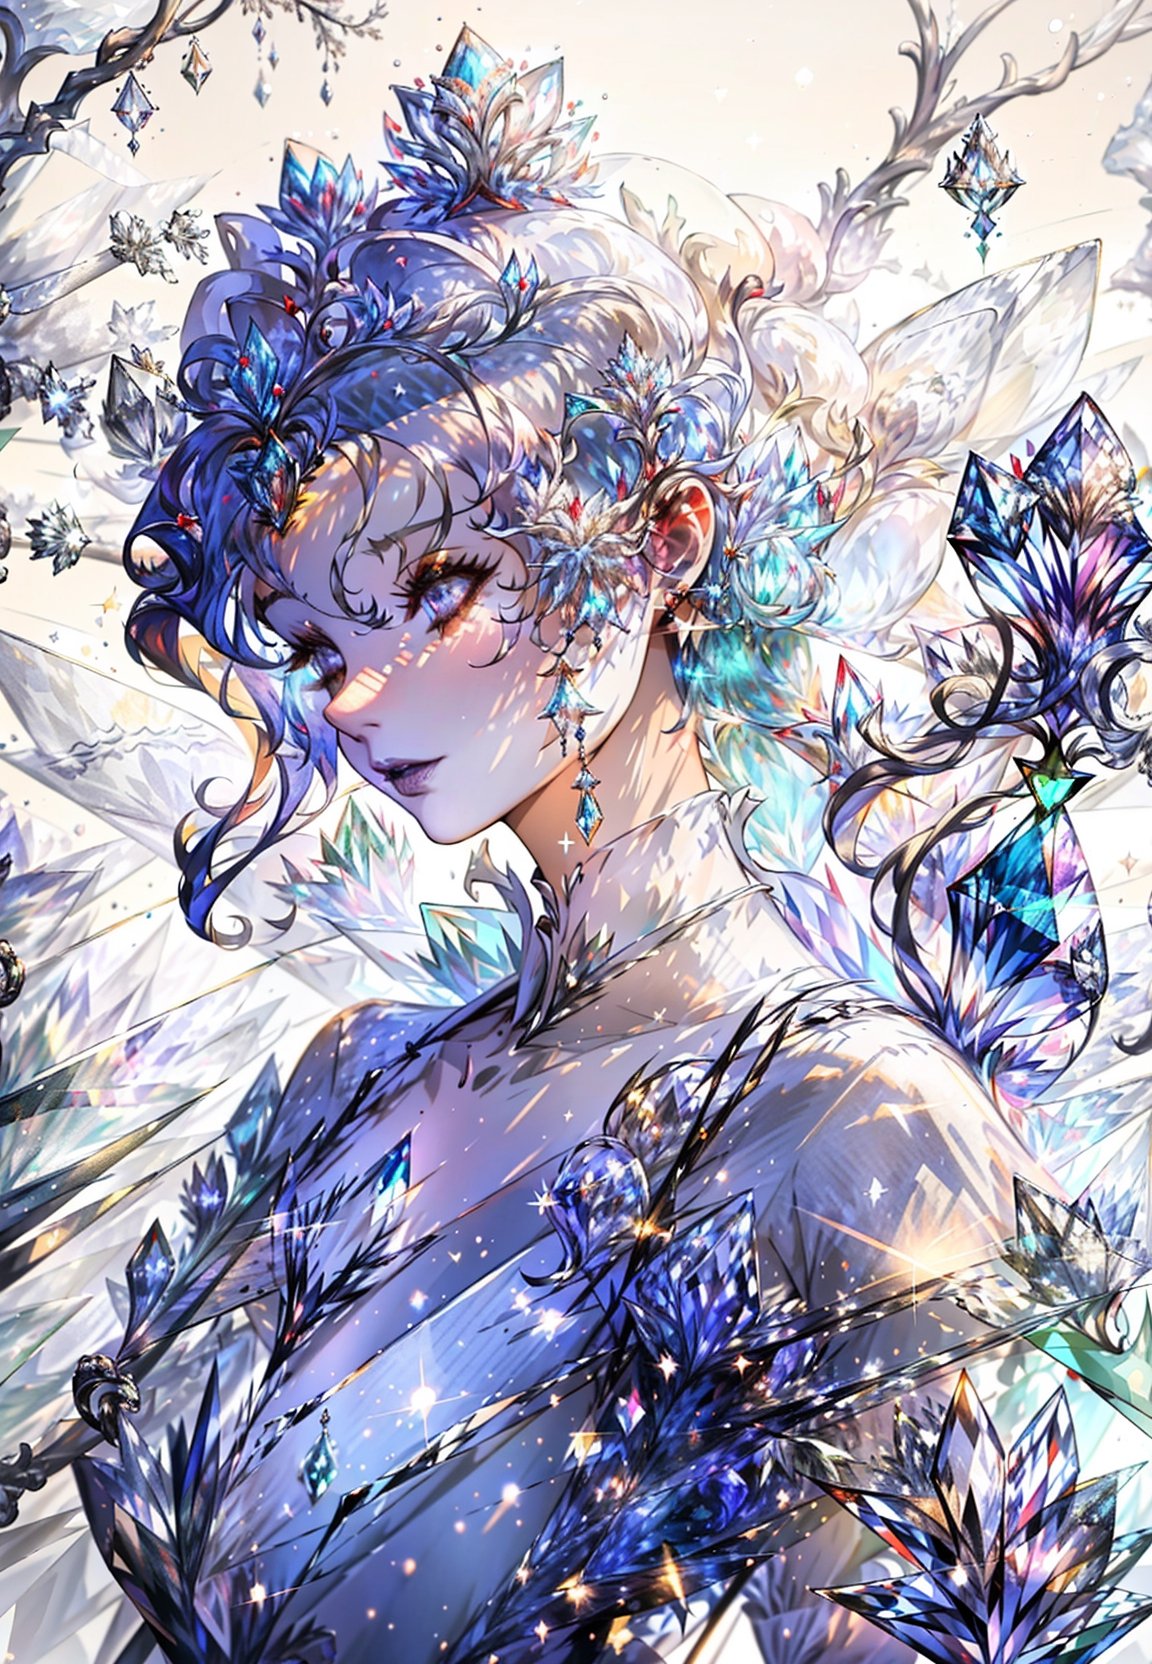 ((masterpiece)), illustrations,(solo:1.2),(original),(very detailed wallpaper),photographic reality, very detailed illustrations, (super-complex detail),(delicate face),perfect detail features,perfect detail,(super complex details),full body,1girl,mid shot,((crystal queen:1.5),(ethereal:1.2),(fire:1.1),(glowing:1.2)), female, (mid shot:1.2), (mysterious:1.2), (enchanted:1.3), (otherworldly:1.1), (dazzling:1.1), (mesmerizing:1.2), (radiant:1.2), (crystalline:1.3), (diamonds:1.2), (crystal dress:1.2), (flowing hair:1.1), (glittering:1.1), (frozen flowers:1.2), (crystal scepter:1.2), (sparkling eyes:1.1), (magic:1.2), (glacier:1.1), (crystal palace:1.3), (frosty trees), (shimmering lake:1.2), (dazzling aurora:1.3), (snowflakes:1.2), (frosty mist:1.1), masterpiece, best quality, lens flare, depth of field, motion blur, (backlighting, Backlight:1.1), grating,raster,(Light through hair:1.2),from side,
